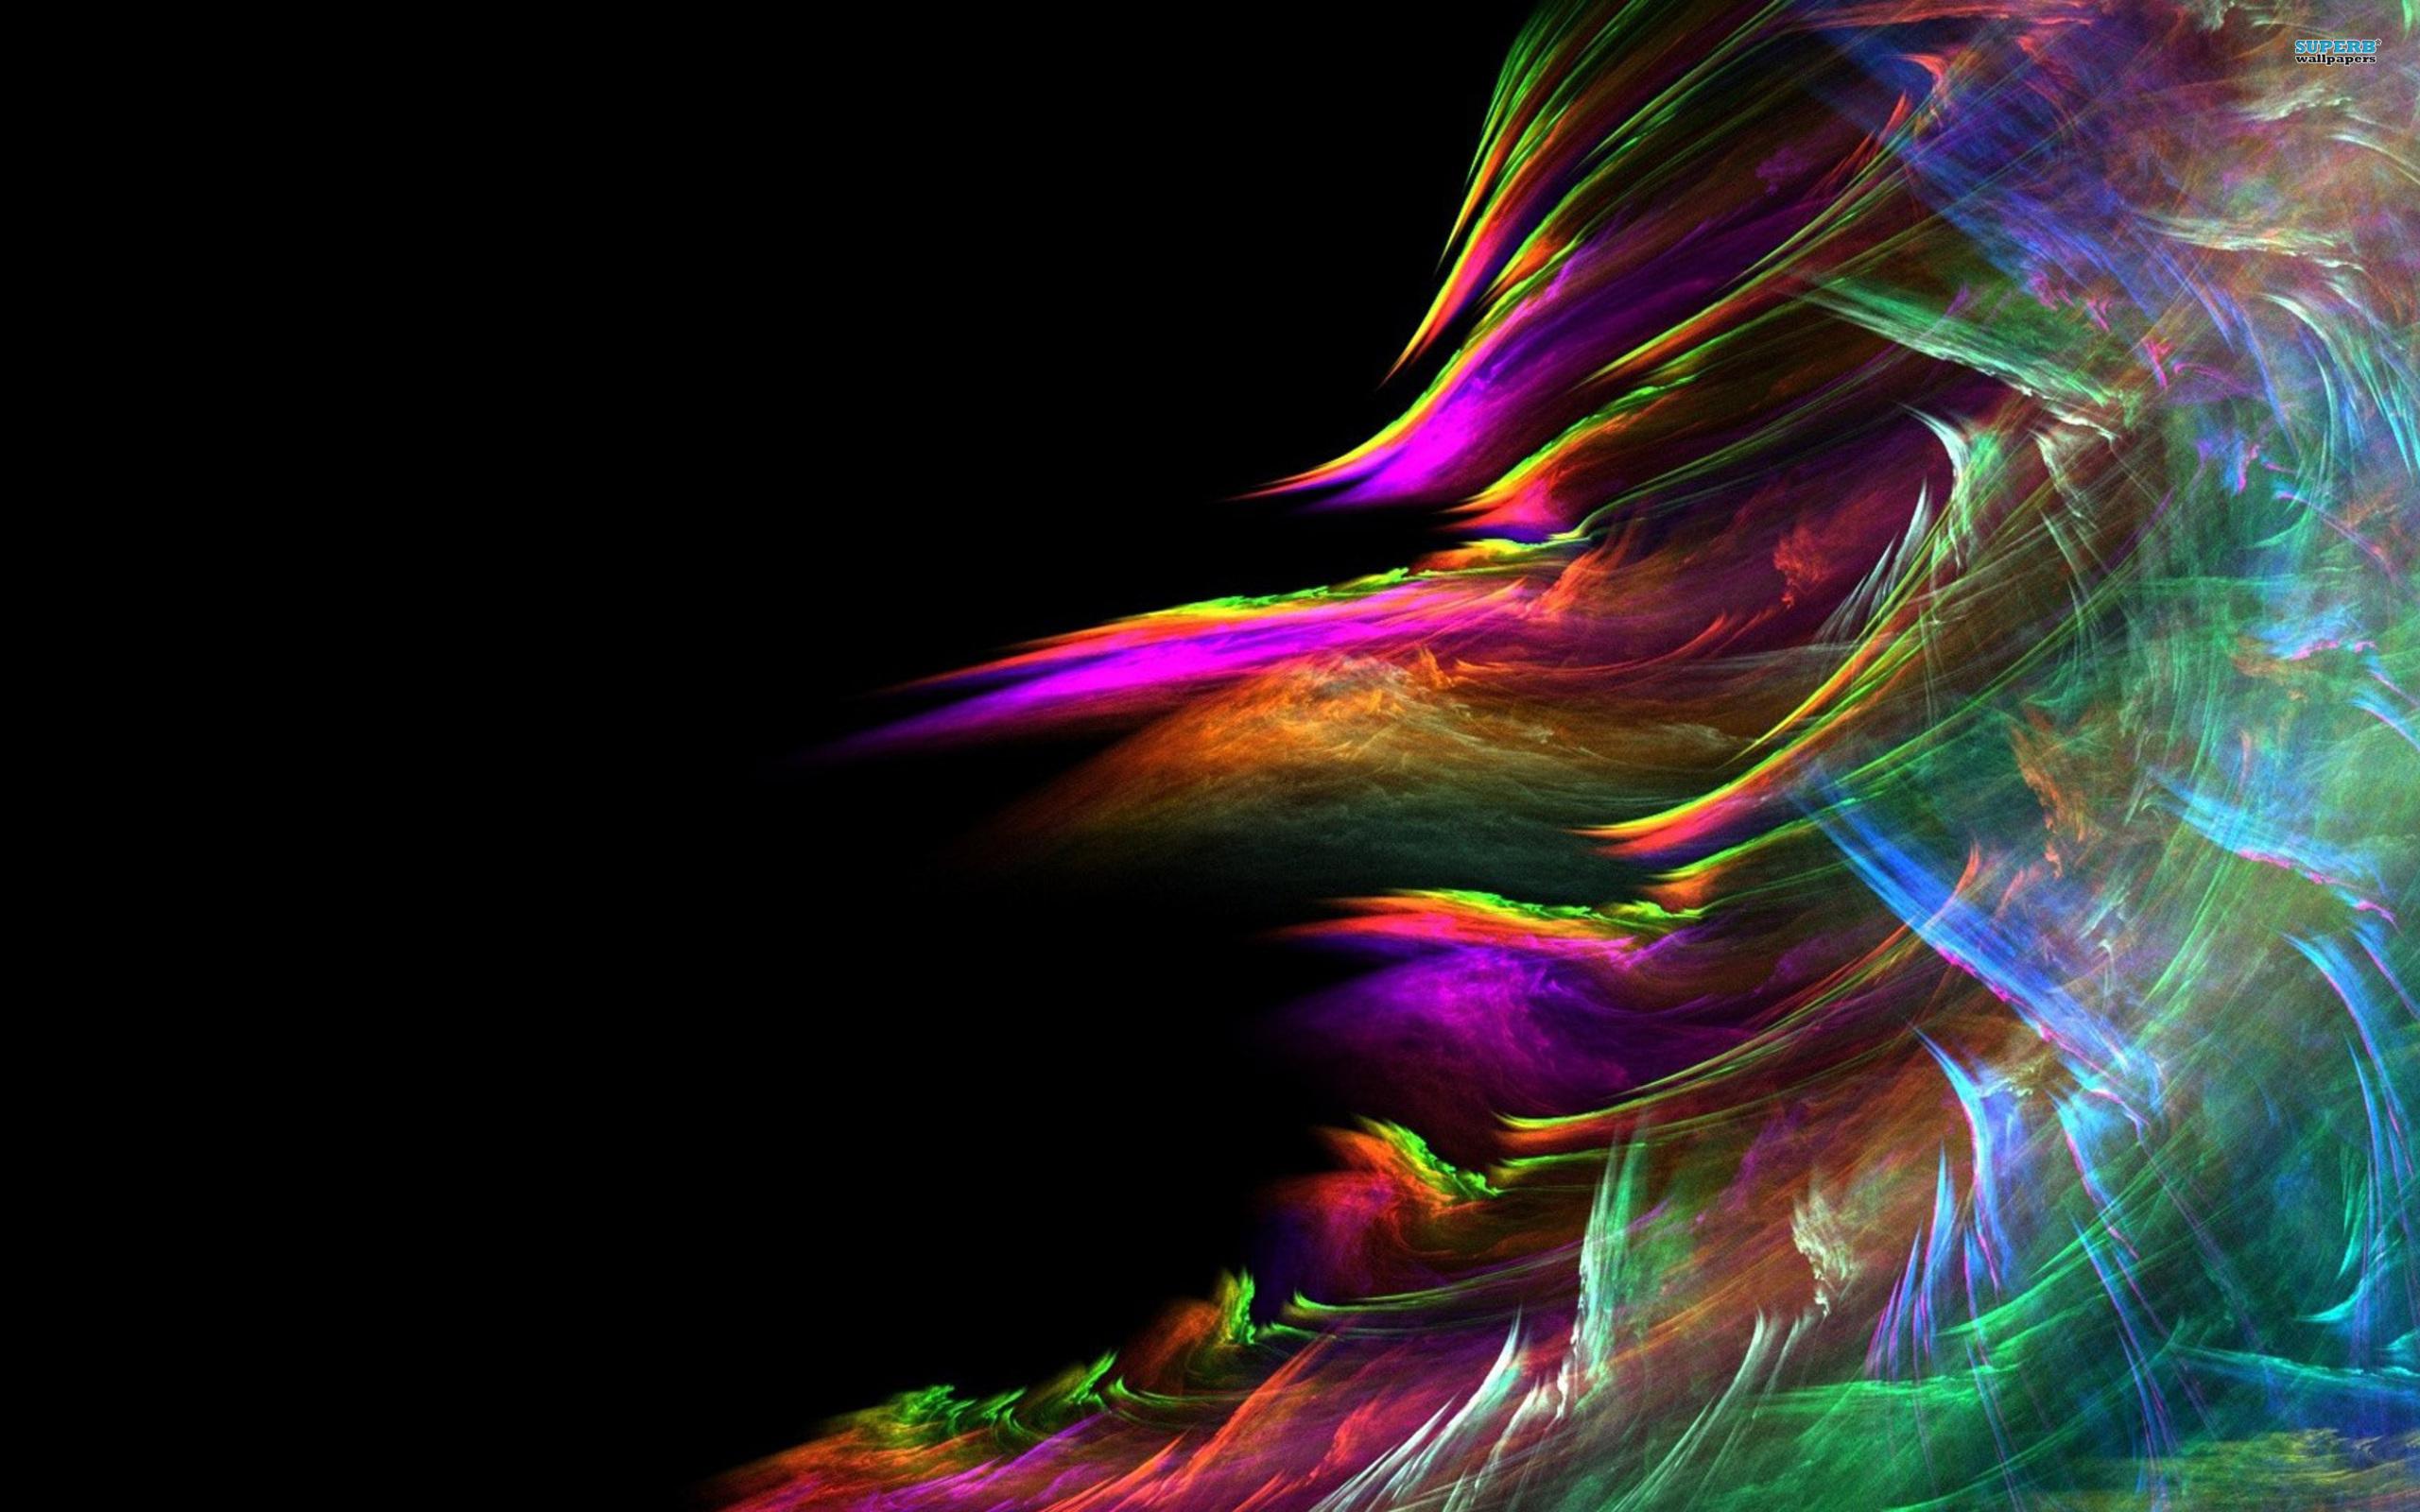 Abstract Flower Colorful Wind 901680 Wallpapers wallpapers